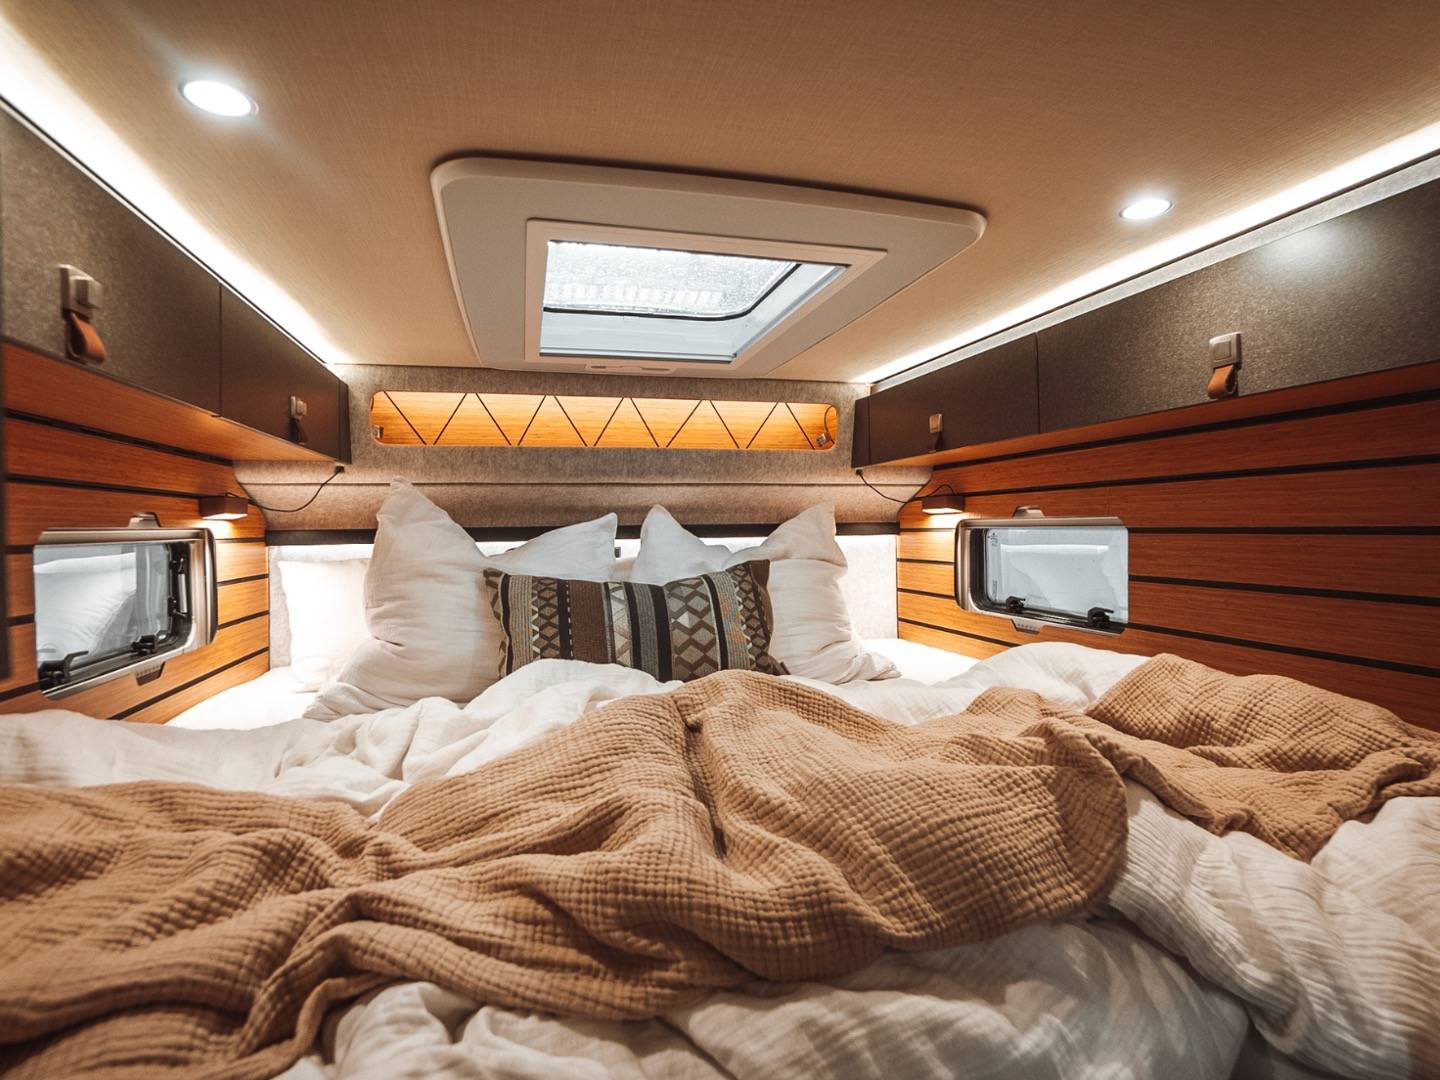 The bedroom inside the ML-T 580